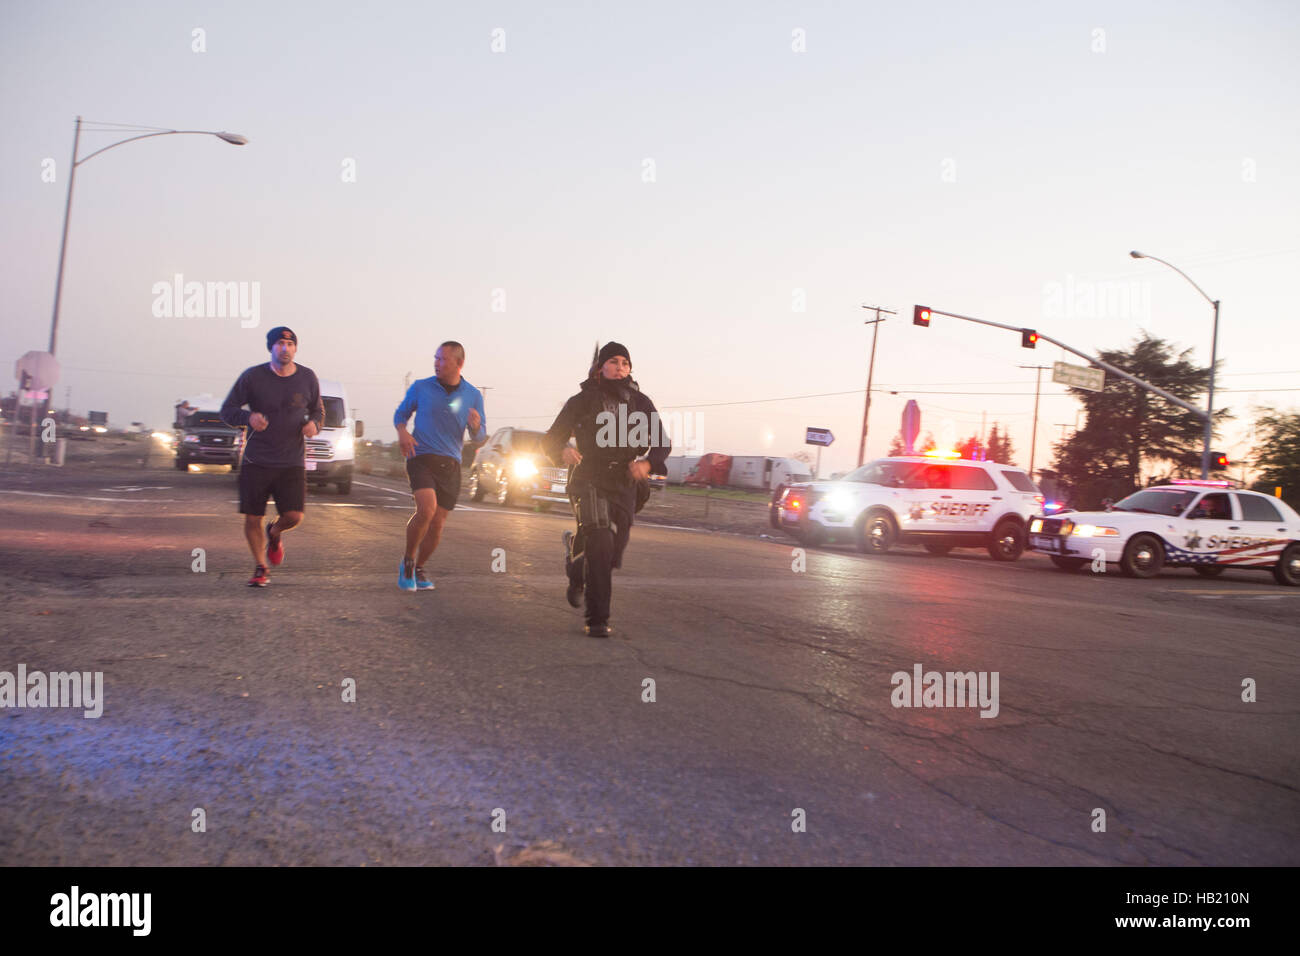 Turlock, CA, USA. 3rd Dec, 2016. Stanislaus County Sheriff along with Turlock Police Department escorted and blocked the roads for Los Angeles Police Officer Kristina Tudor as she runs down Golden State Blvd. south of Turlock California Saturday Saturday Dec. 3rd 2016 evening on her and Officer Joe Cirrito 420 mile run to Sacramento California from Los Angeles. The run is to raise awareness, funds and to honor the officers killed in the line of duty. Along with the families of officers killed in the line of duty. © Marty Bicek/ZUMA Wire/Alamy Live News Stock Photo